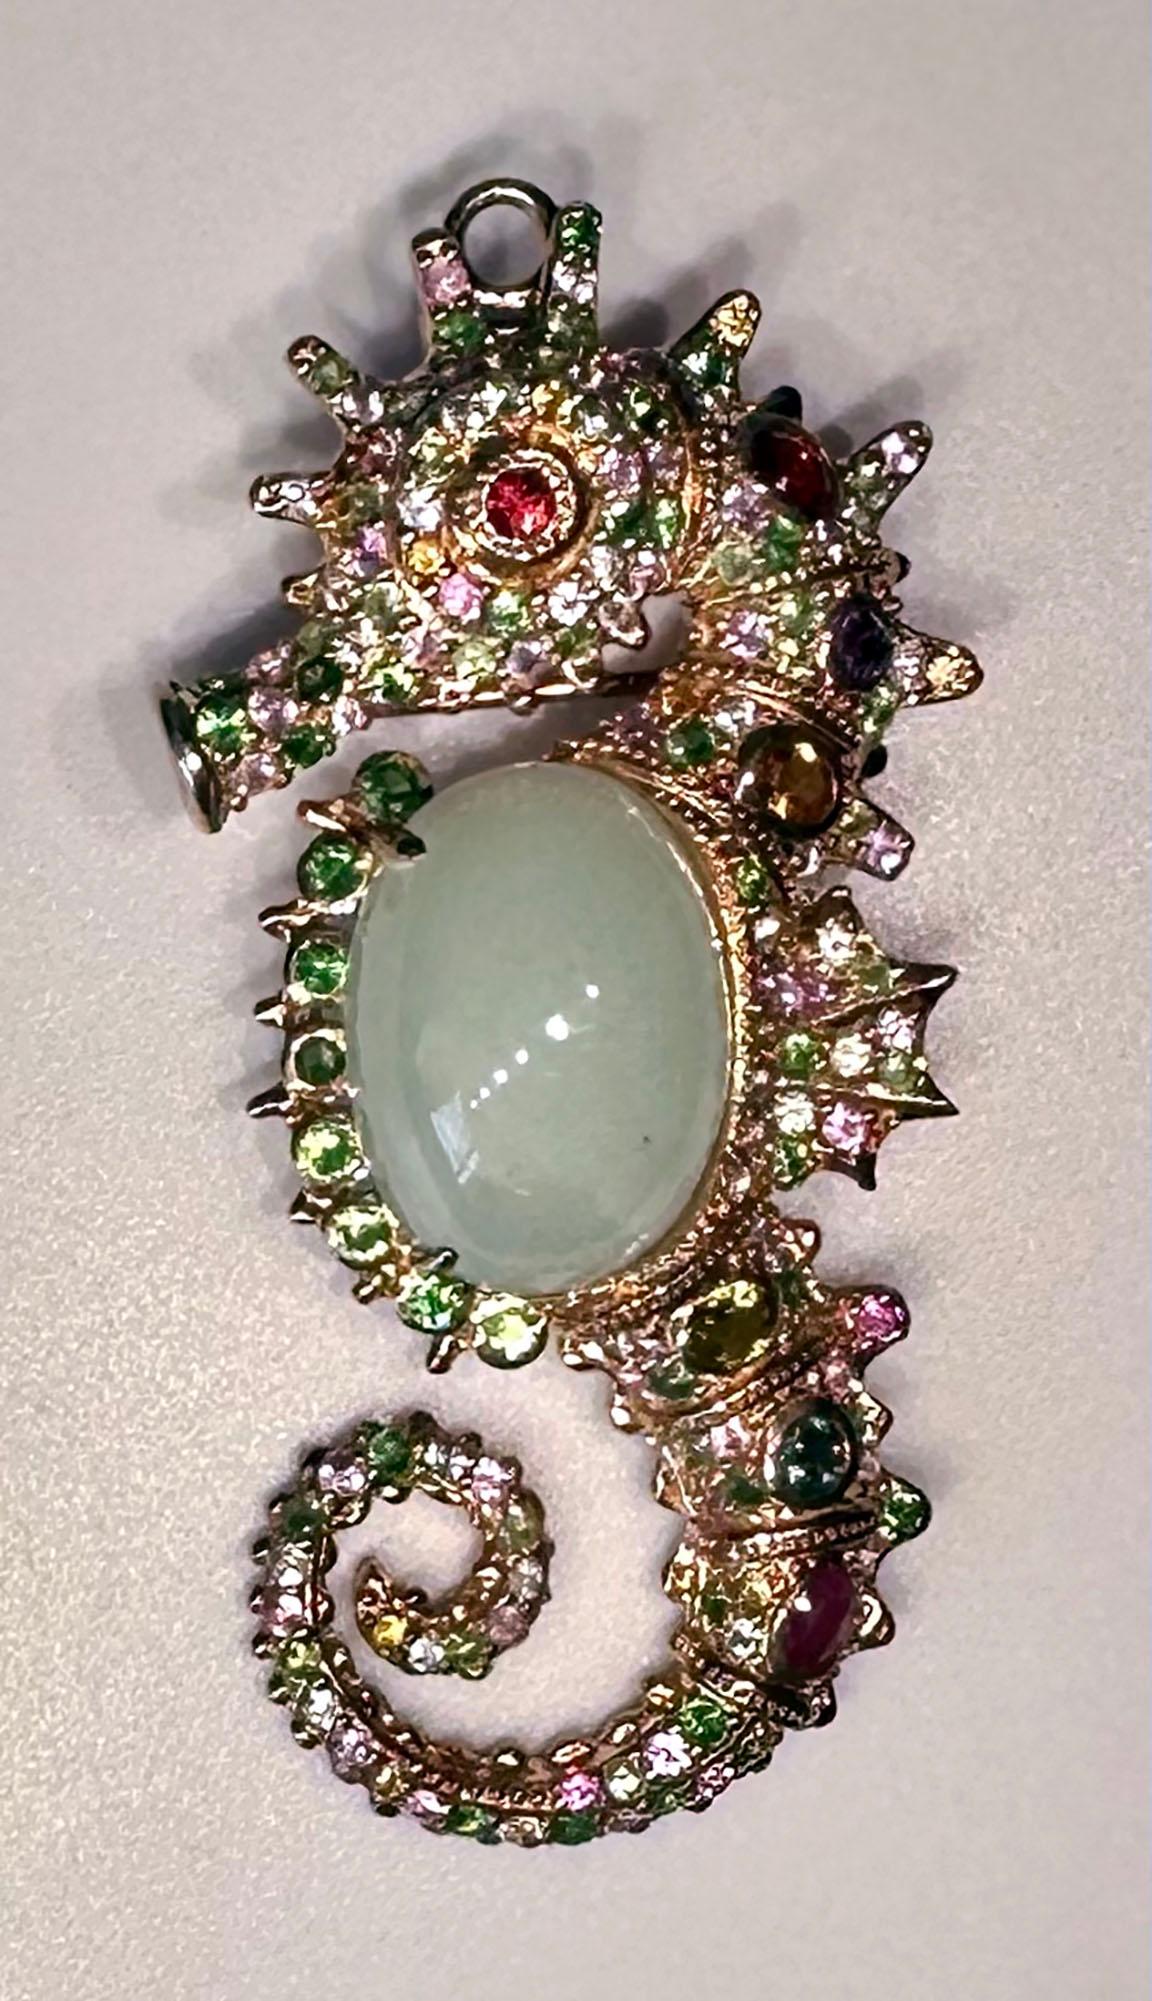 A Rose Gold Plated, Silver Seahorse Brooch/Pendant set with a milky Aquamarine Cabochon, Tsavorite, Sapphire, & Tourmaline. This pave encrusted seahorse has a of,d down loop dial so it can be worn as a pendant as well as a brooch. This is a